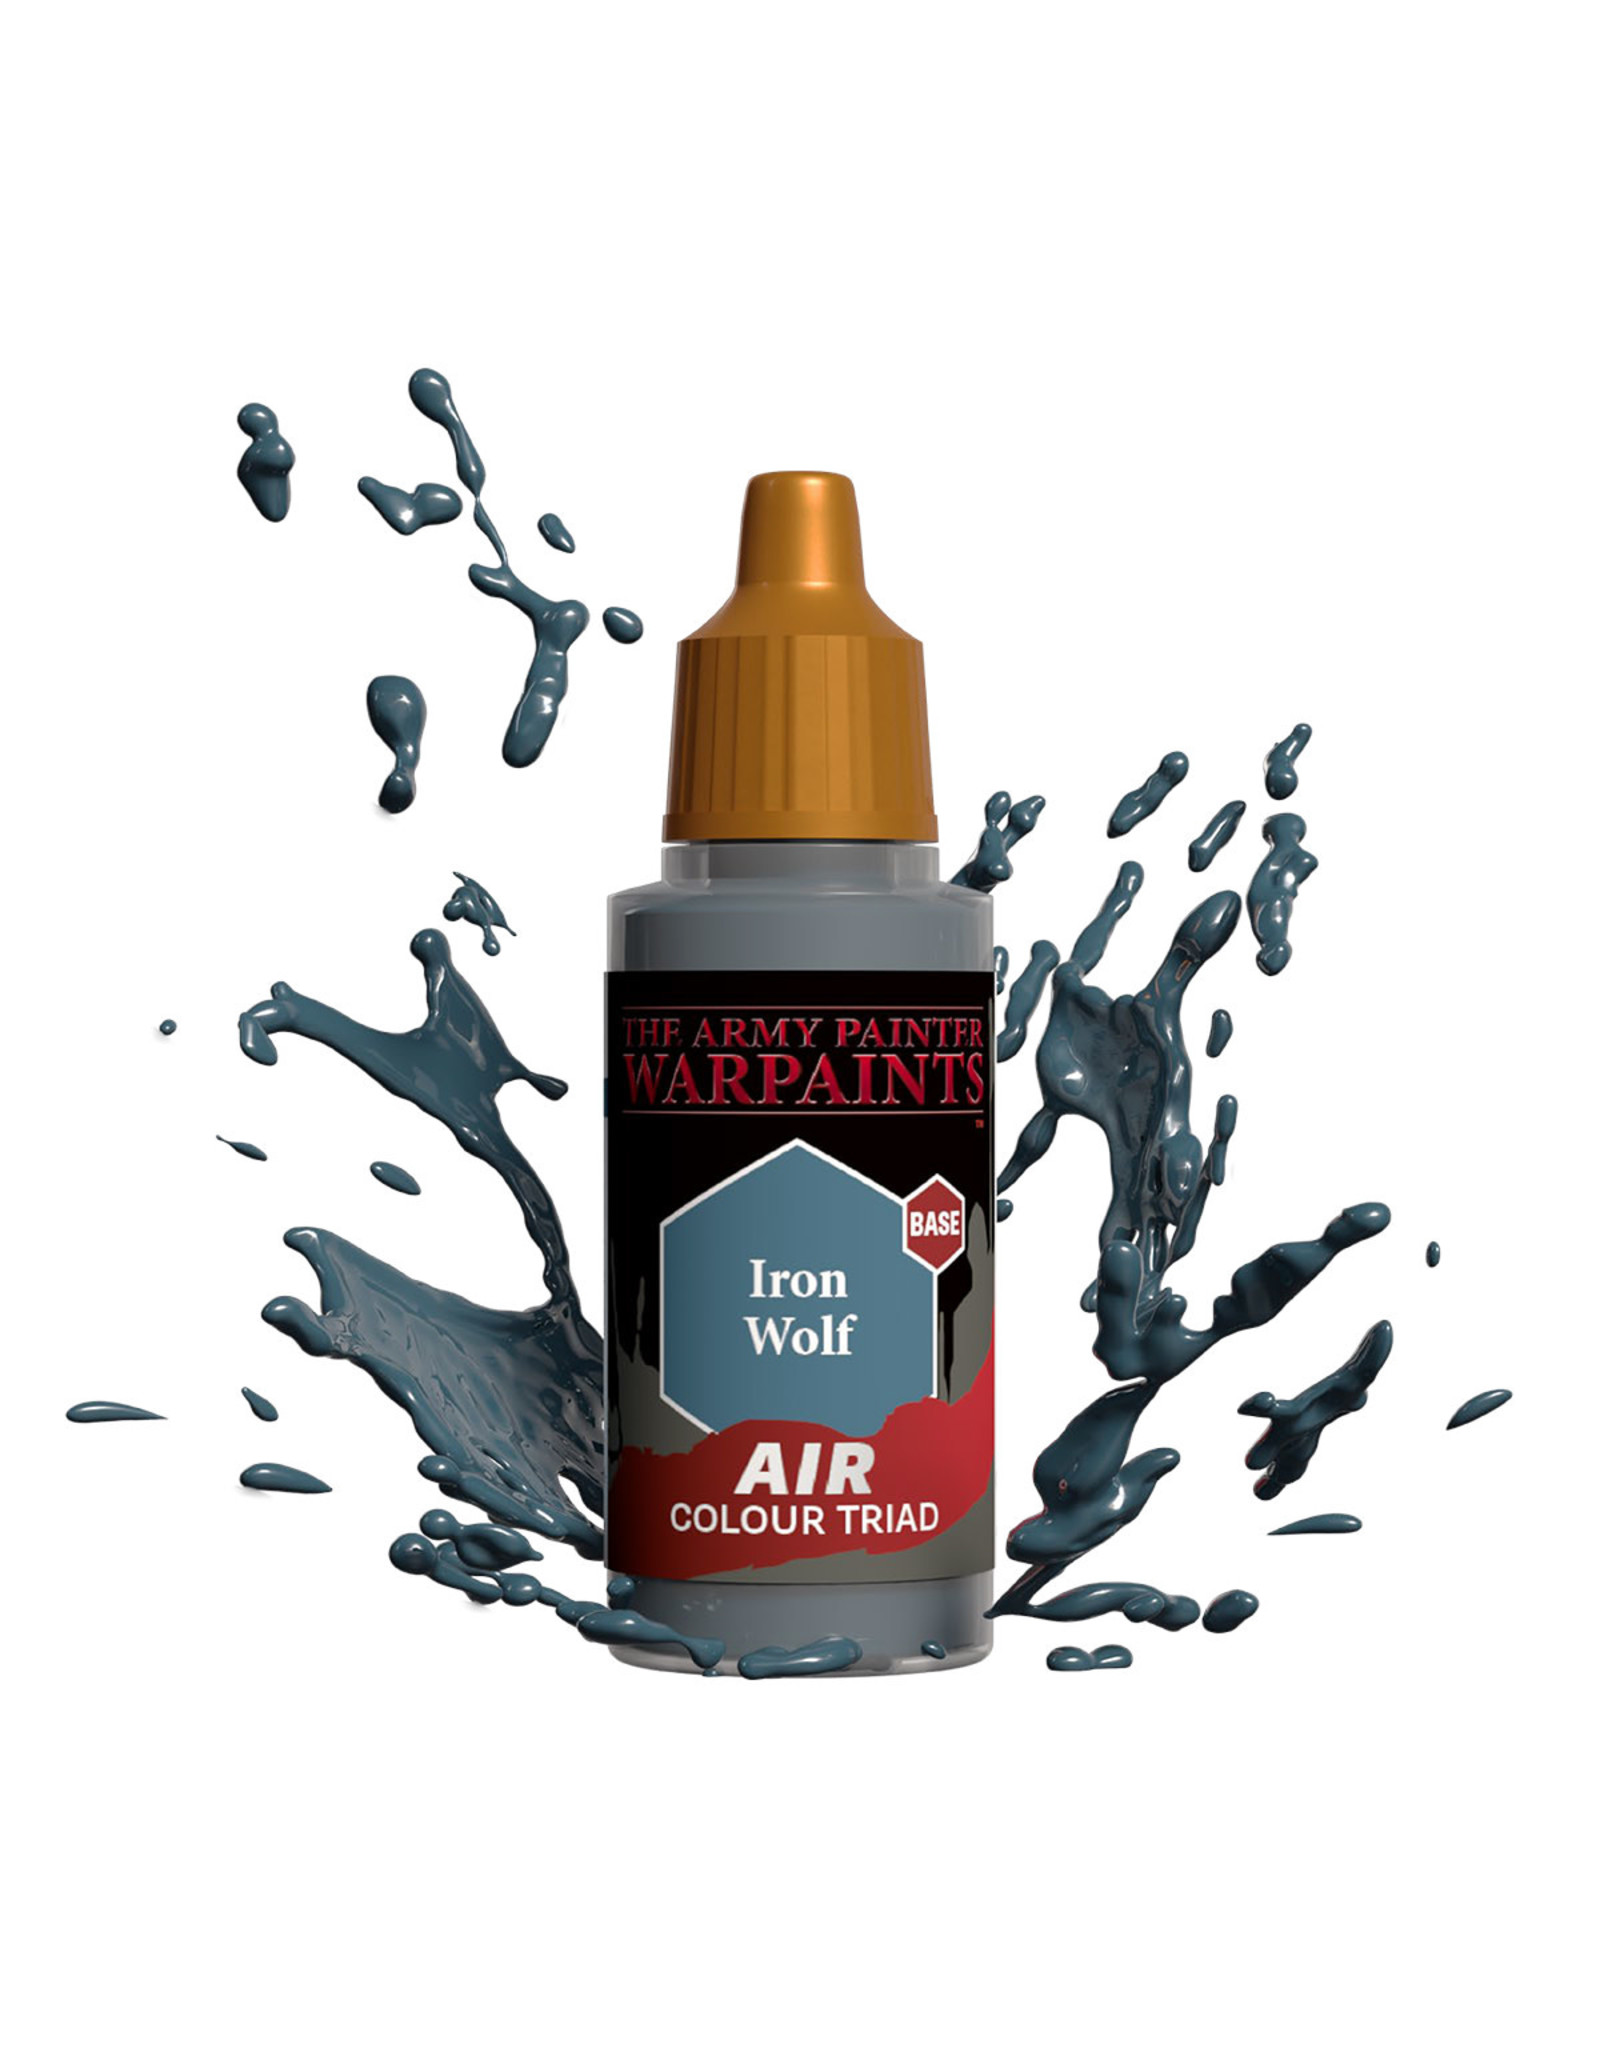 The Army Painter The Army Painter Warpaints Air: Iron Wolf